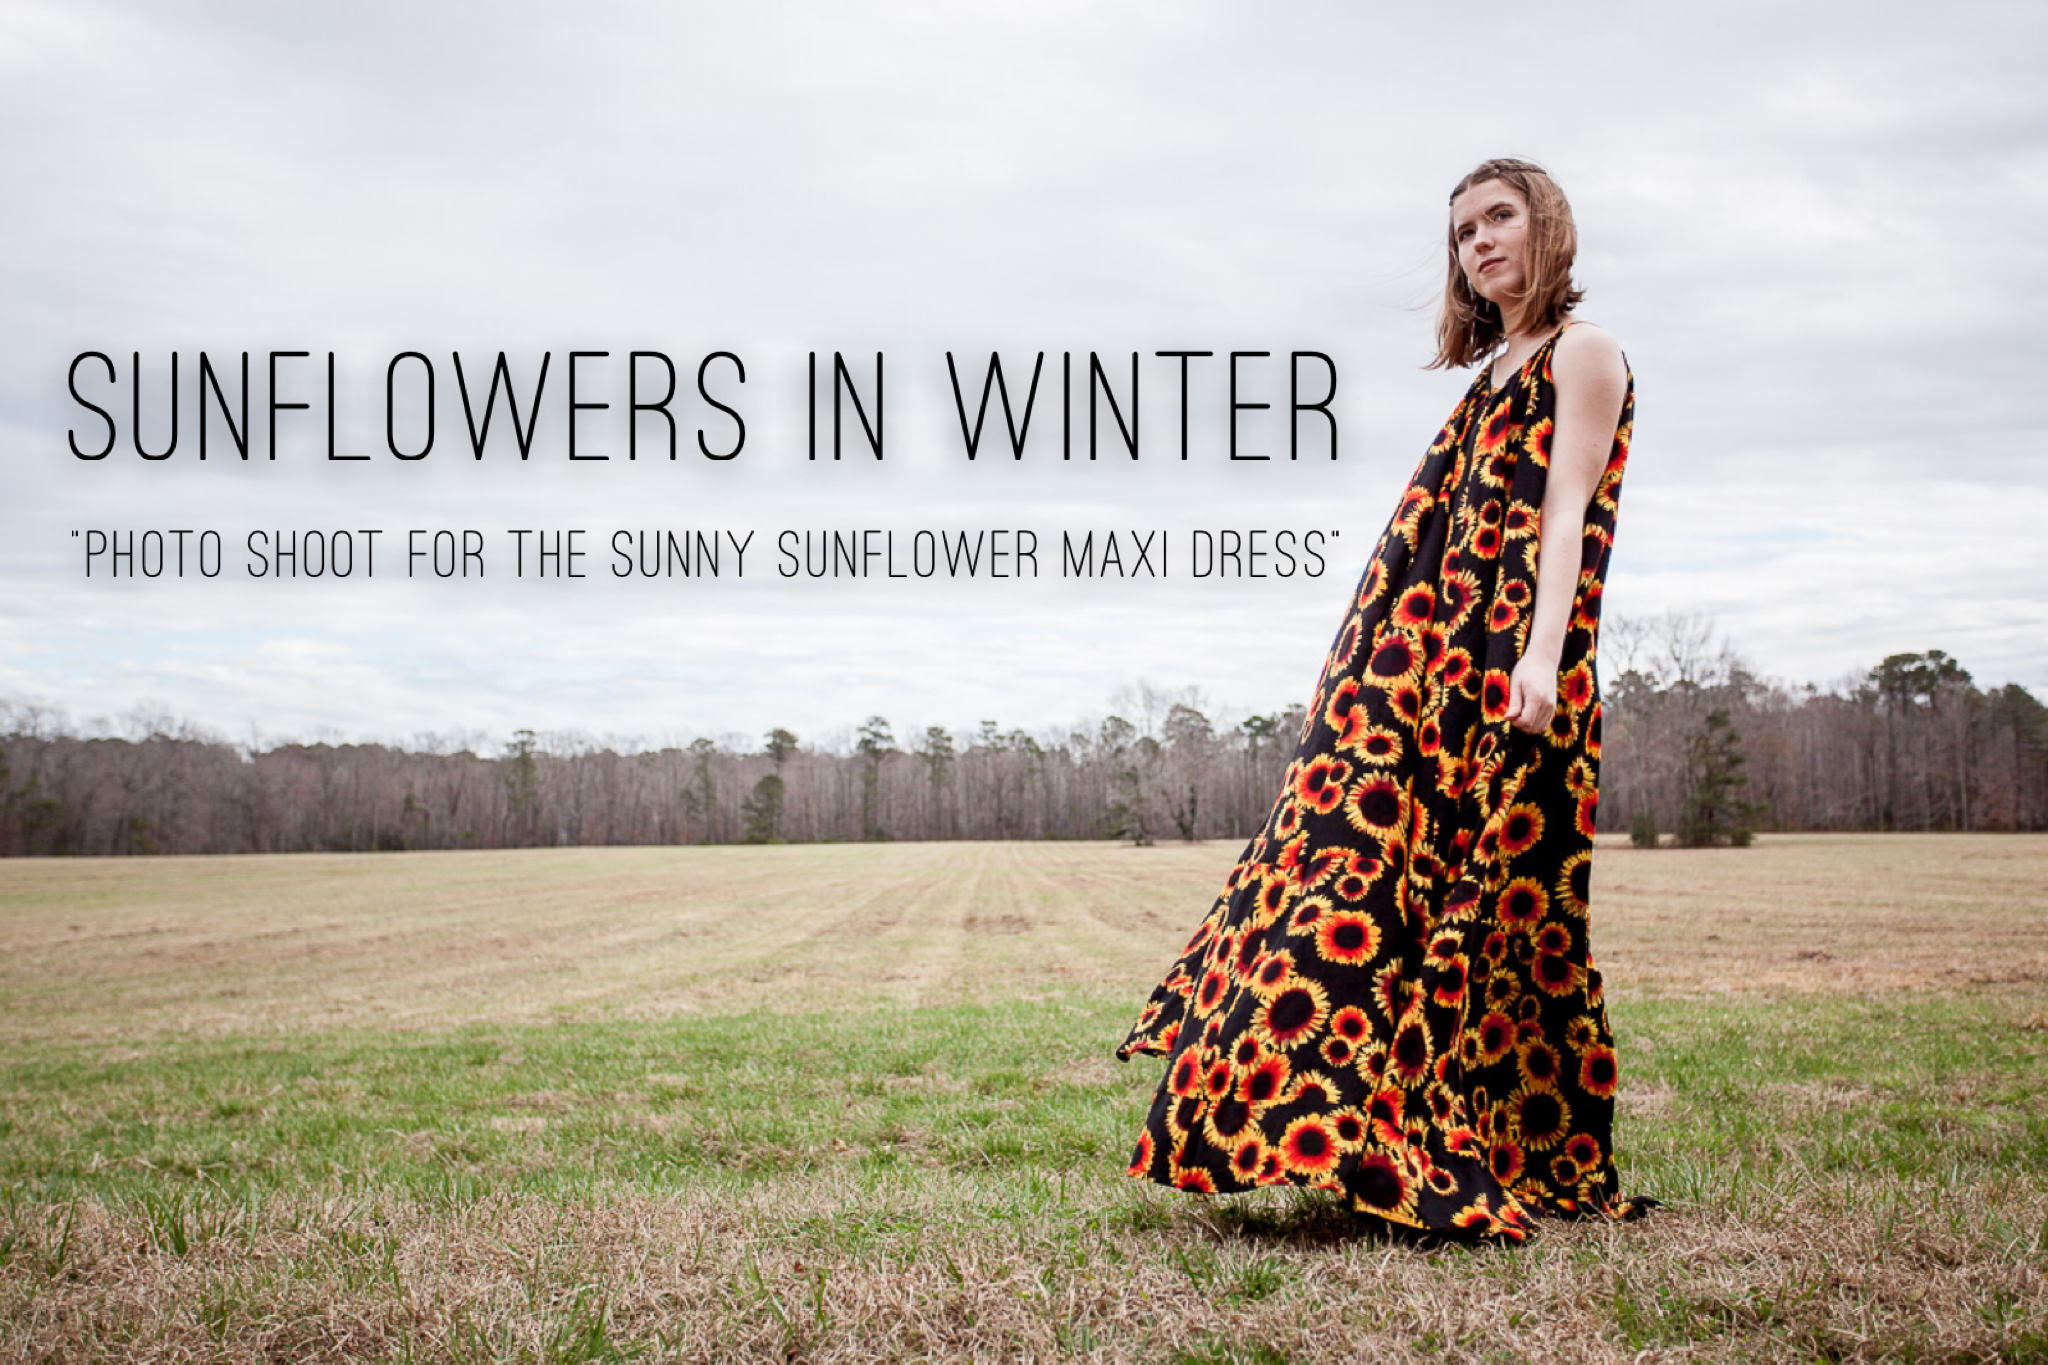 SUNFLOWERS IN WINTER-the photoshoot for the Sunny Sunflowers Maxi Dress @gossamerydreams.com